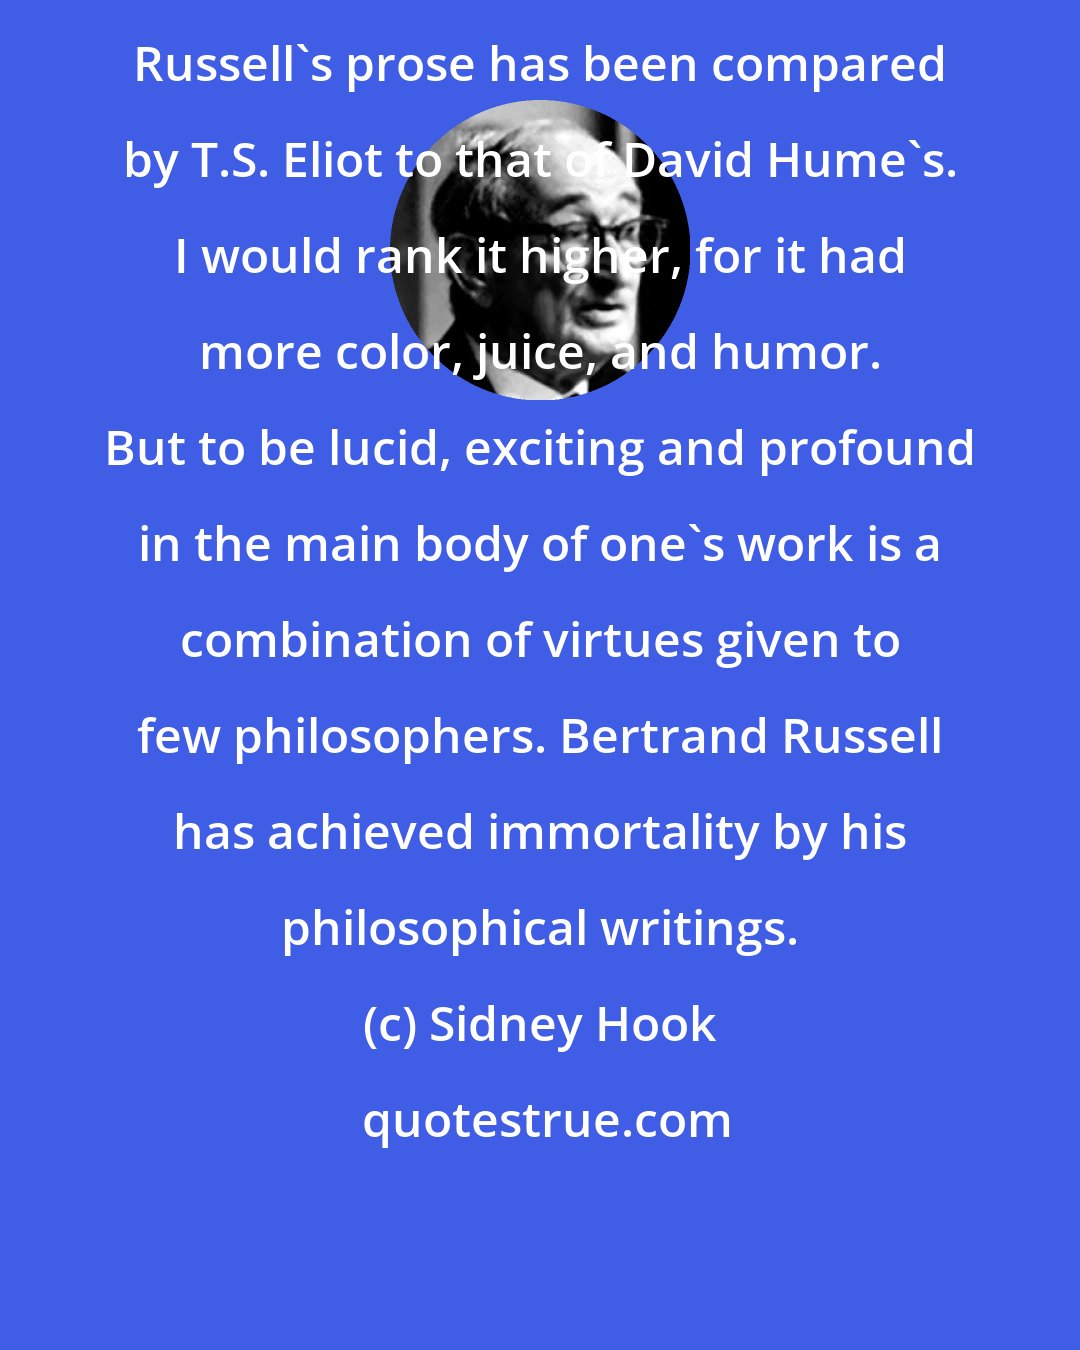 Sidney Hook: Russell's prose has been compared by T.S. Eliot to that of David Hume's. I would rank it higher, for it had more color, juice, and humor. But to be lucid, exciting and profound in the main body of one's work is a combination of virtues given to few philosophers. Bertrand Russell has achieved immortality by his philosophical writings.